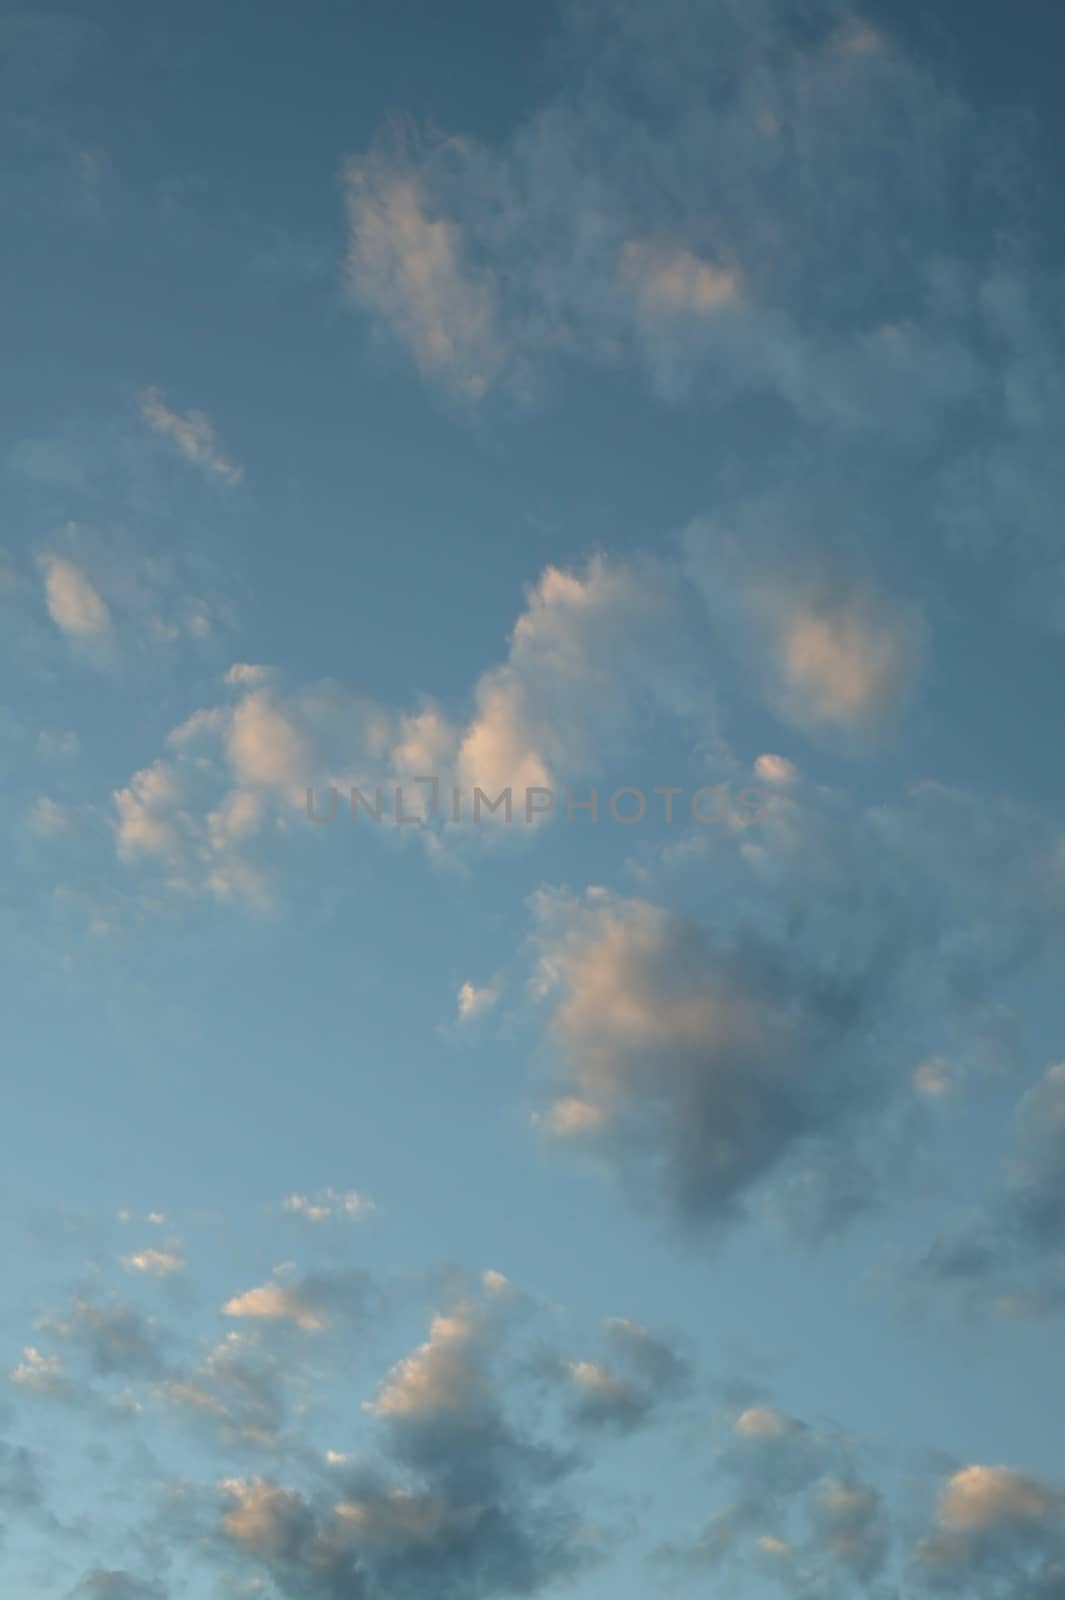 A blue cloudy sky photographed at sunset